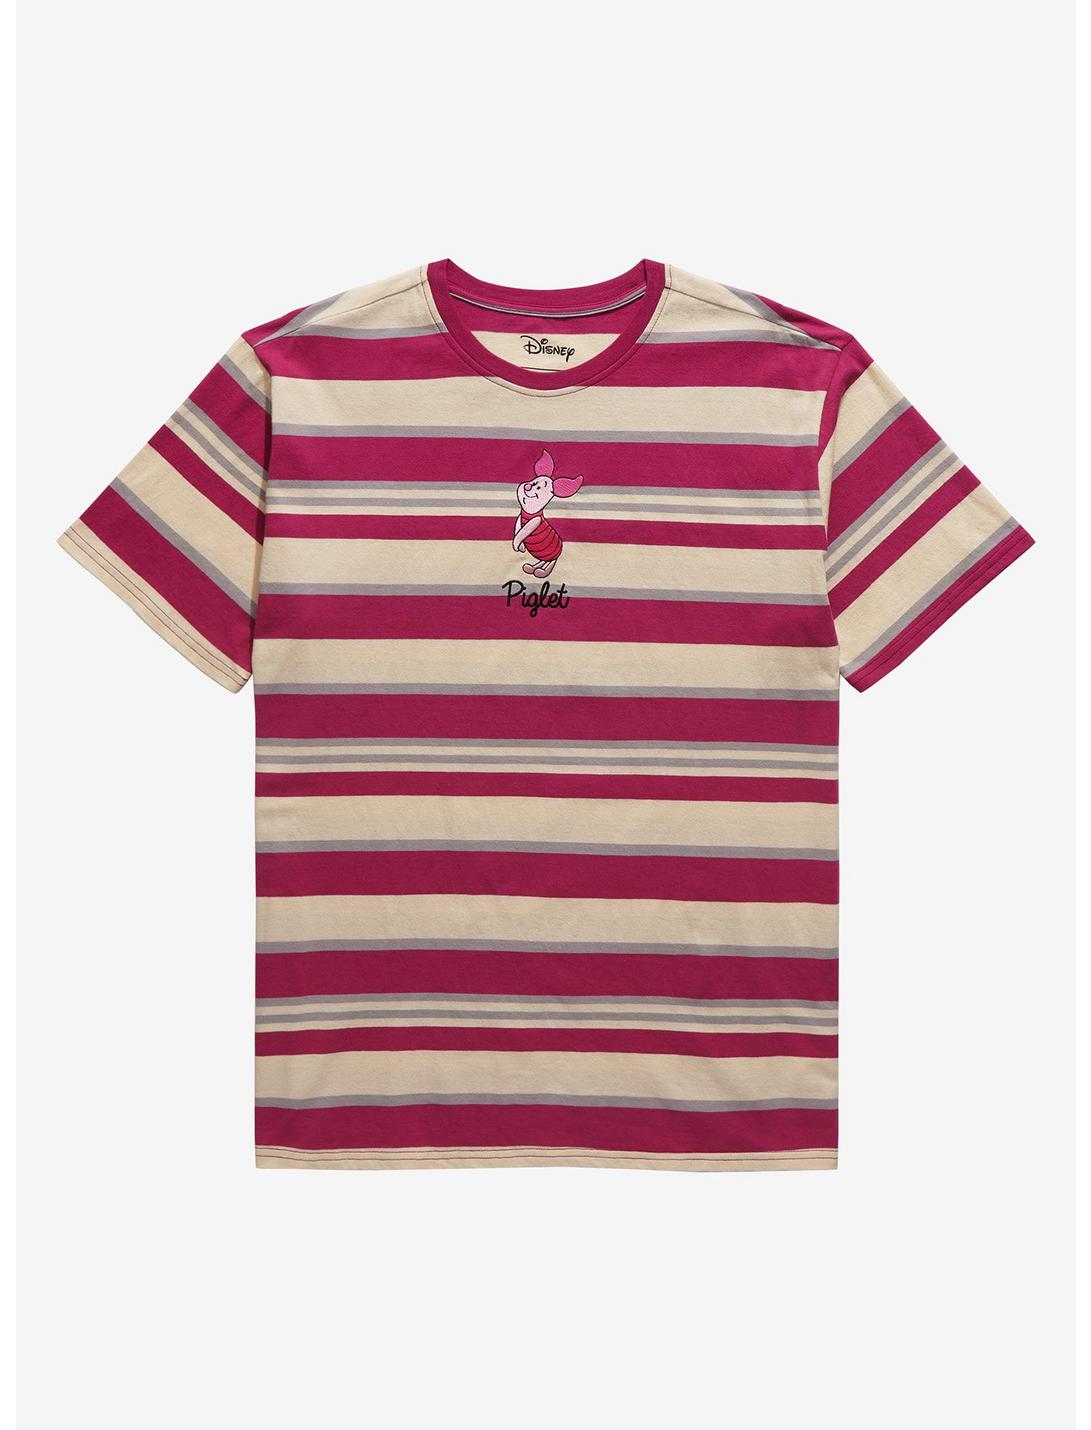 Our Universe Disney Winnie the Pooh Piglet Striped T-Shirt - BoxLunch Exclusive, PINK STRIPE, hi-res